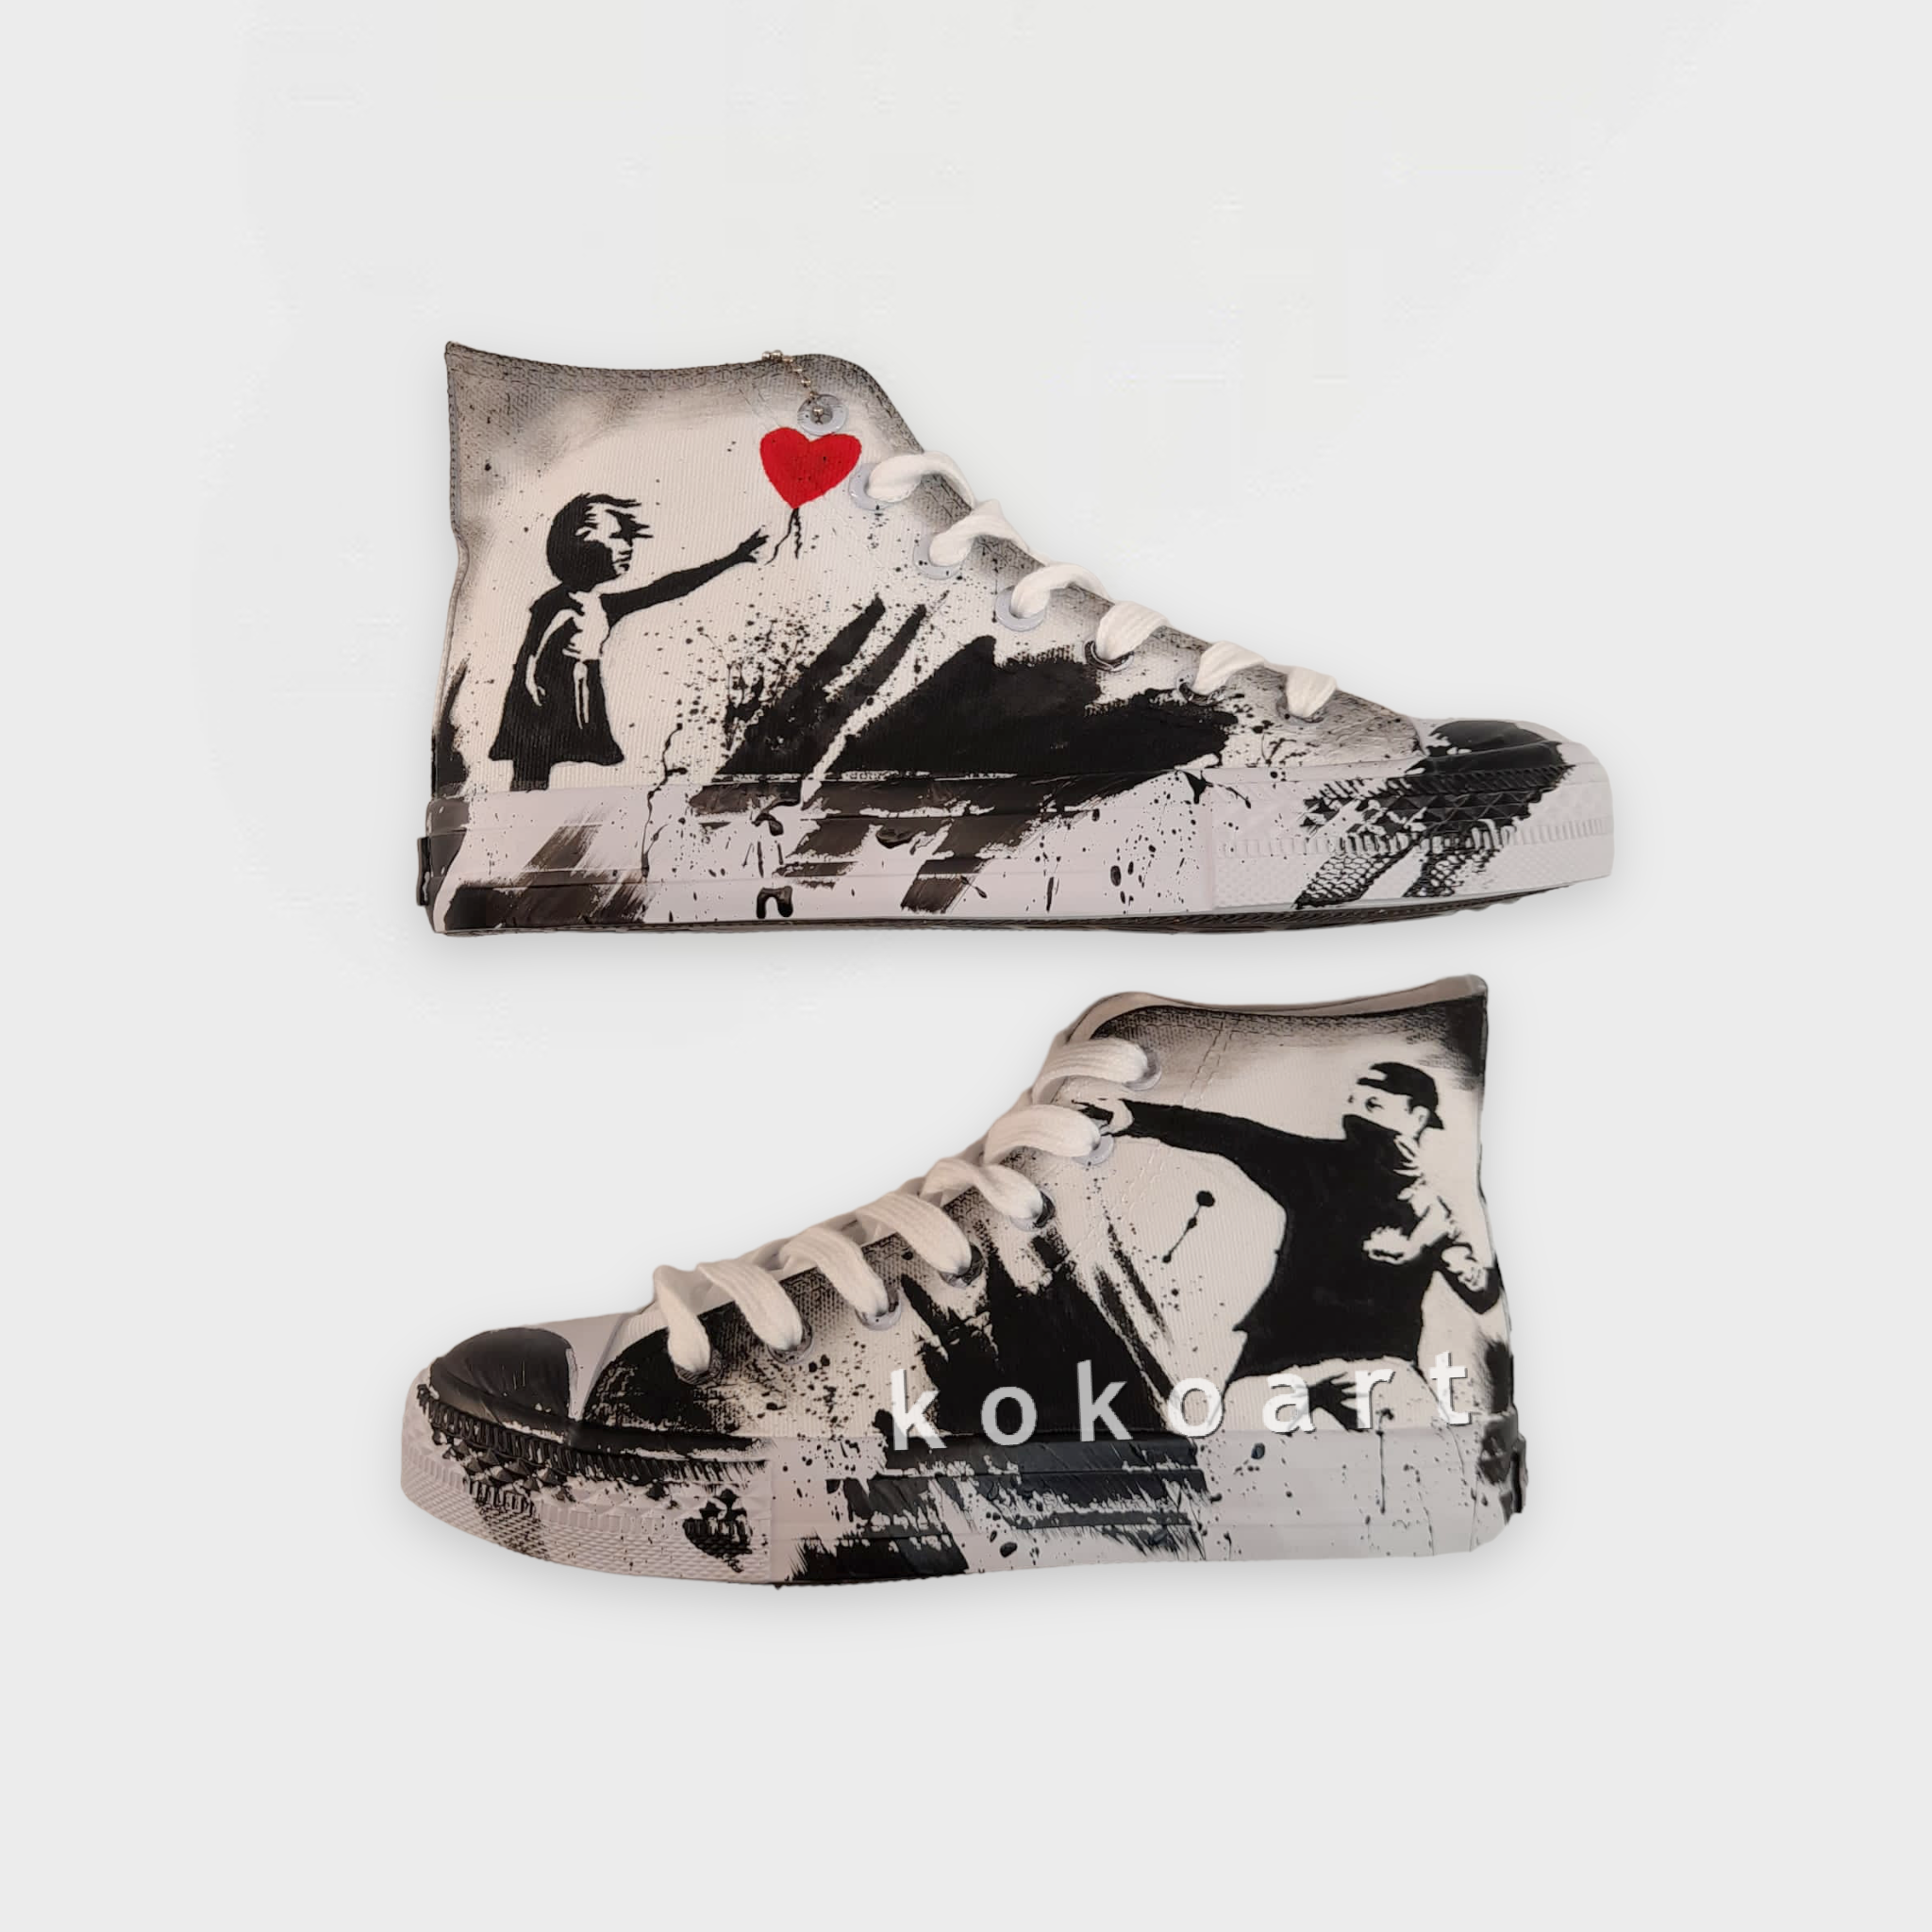 Banksy Brush Strokes Hand Painted Shoes